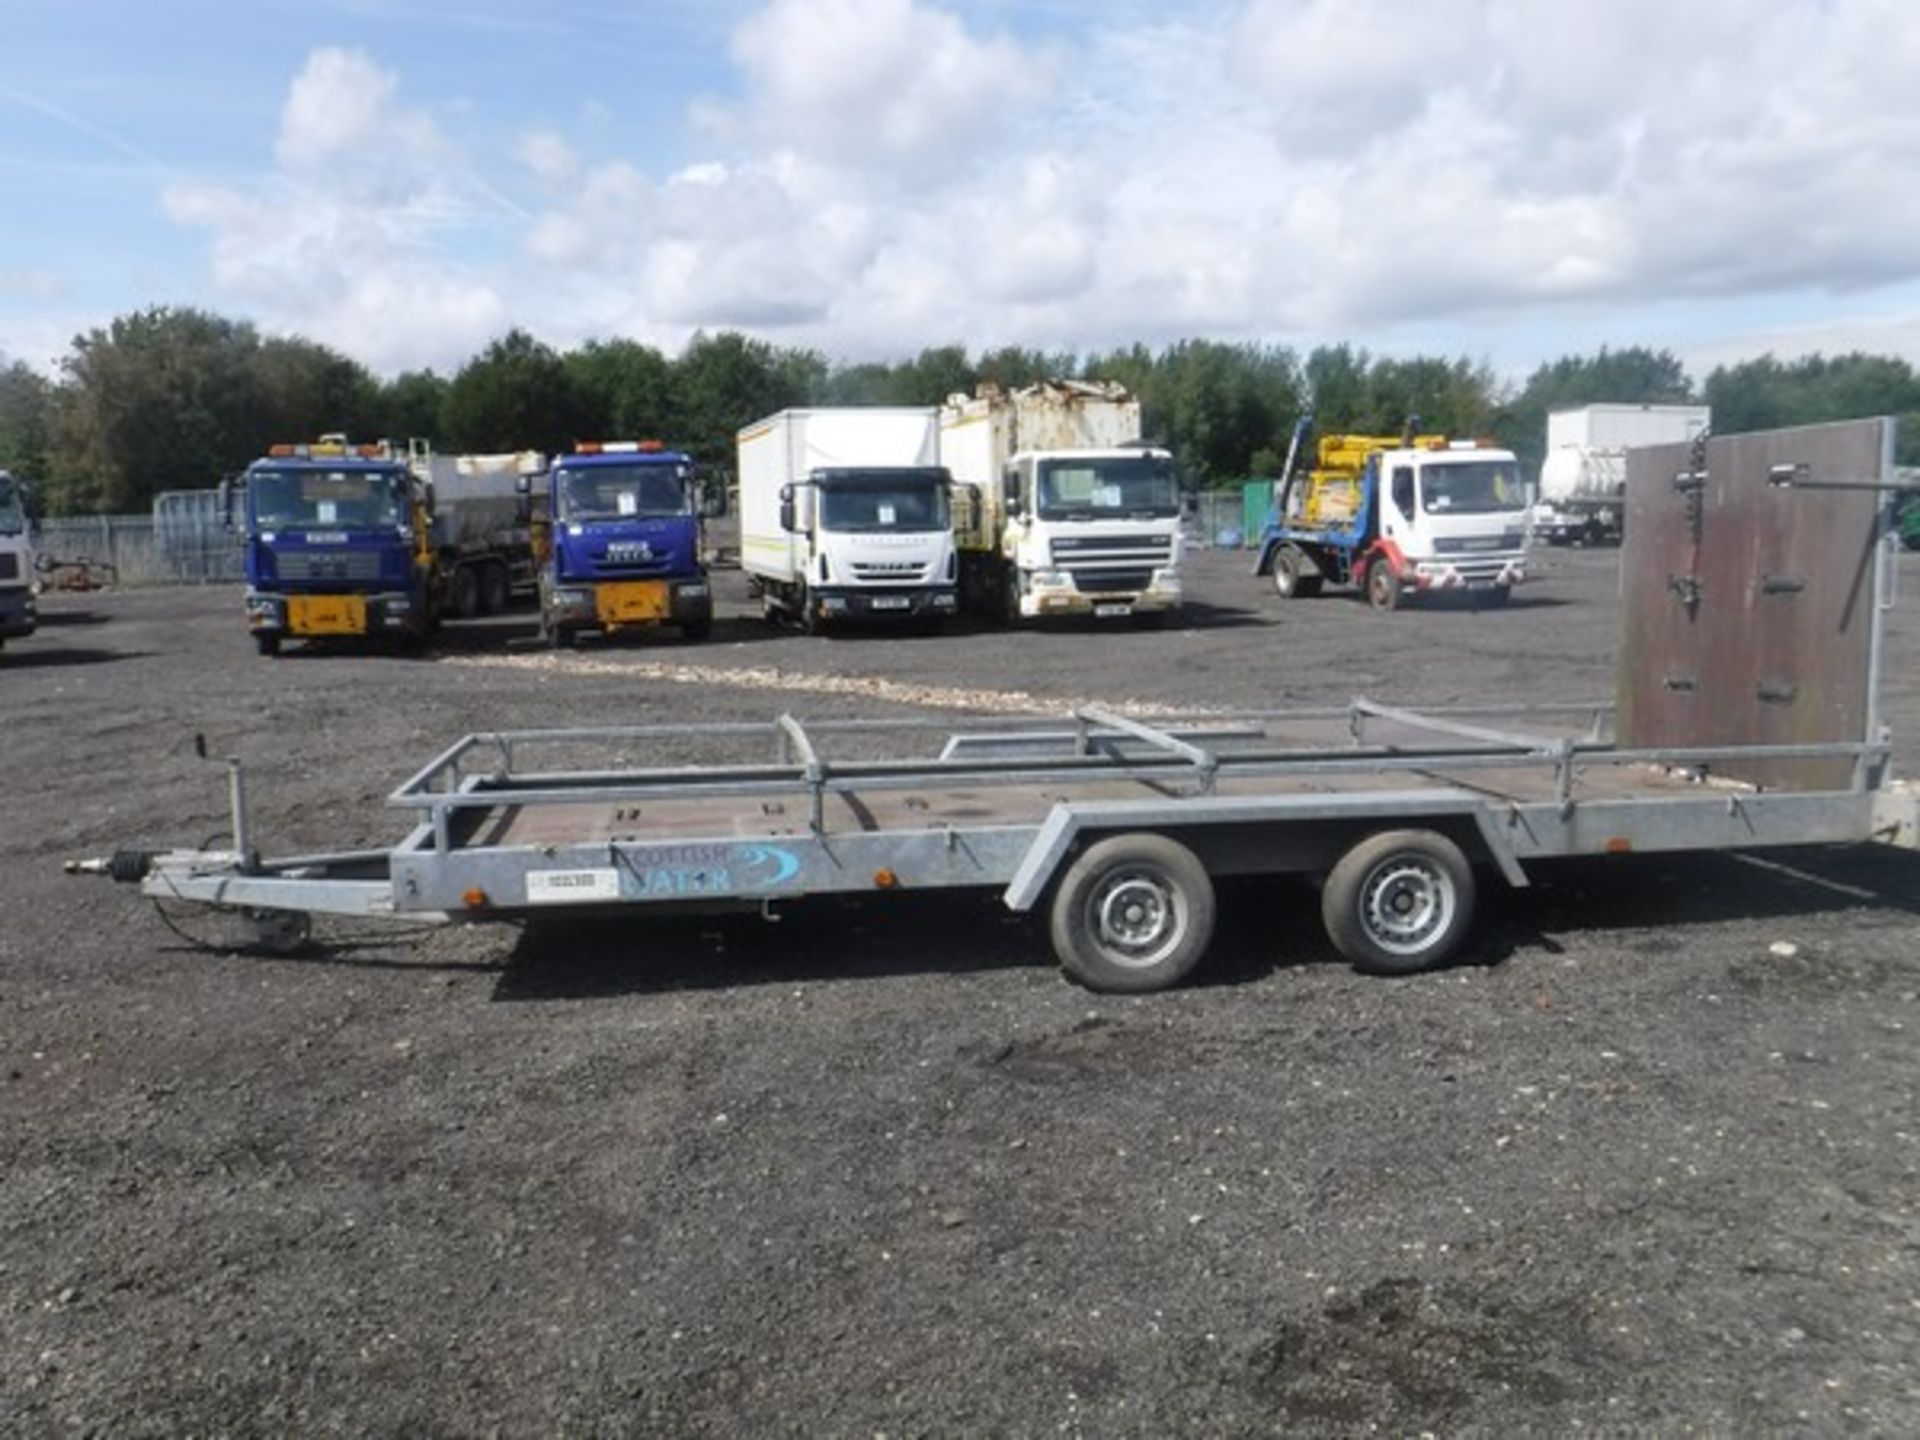 2003 WESTERN TRAILERS 18' x 6' twin axle trailer c/w 5' ramp. Max gross weight 2000kg VIN G50014/11. - Image 11 of 12